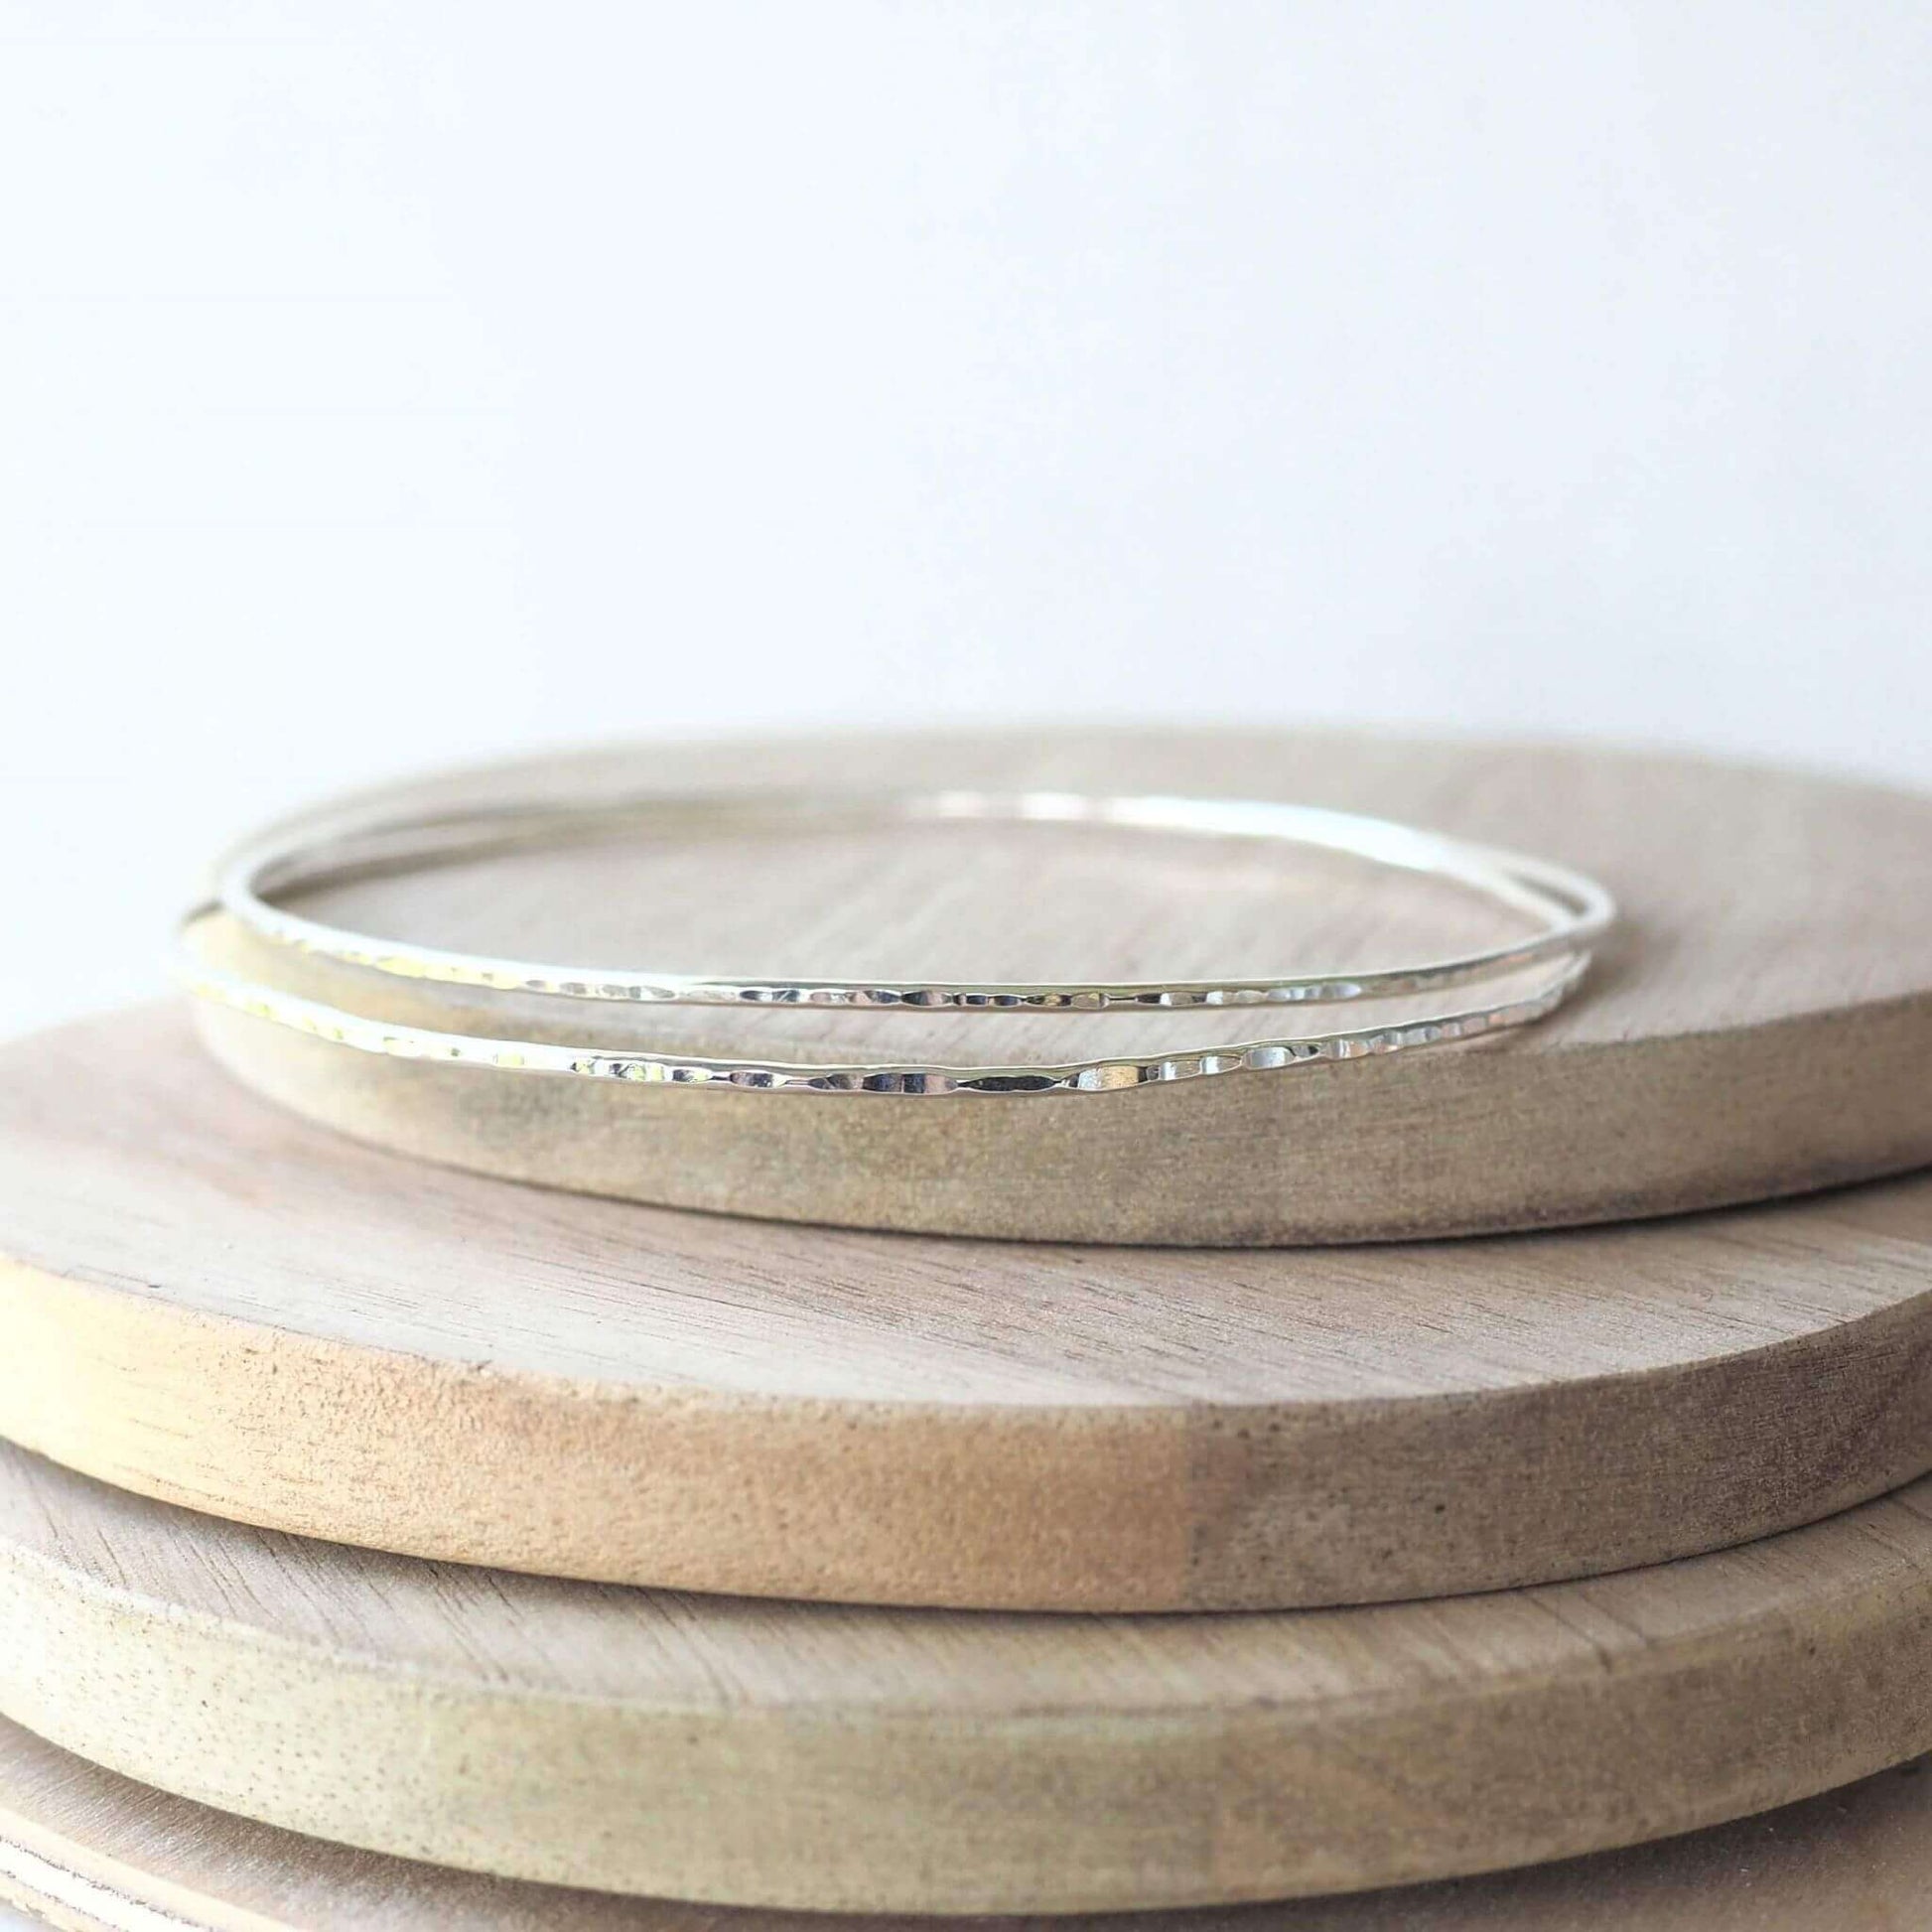 Pair of narrow hammered silver bangles designed for layering and wearing in sets. Set of two pictured on a wood background. Handmade by maram jewellery in Edinburgh UK